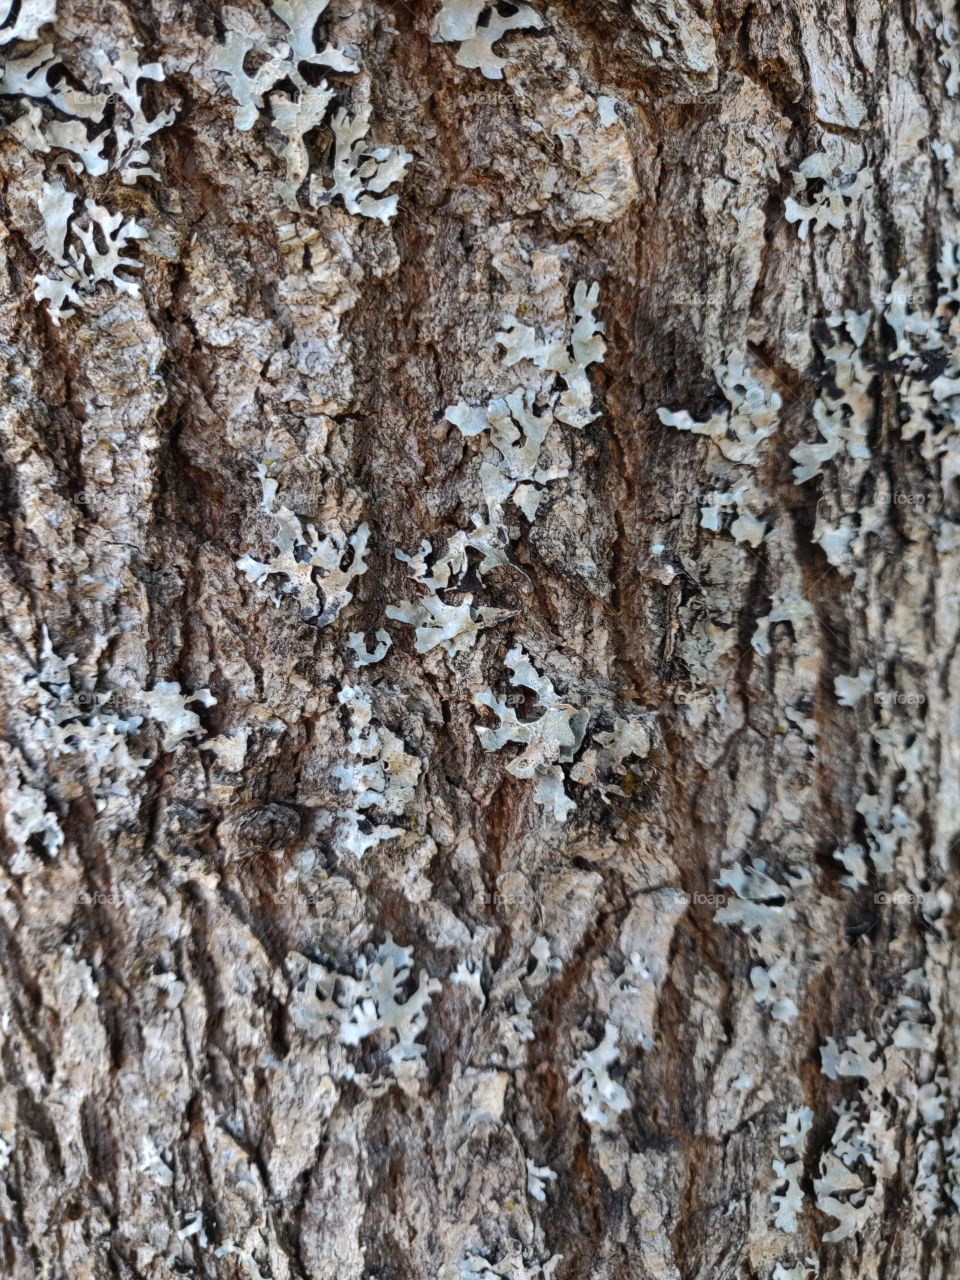 Textured bark from a great Oak tree